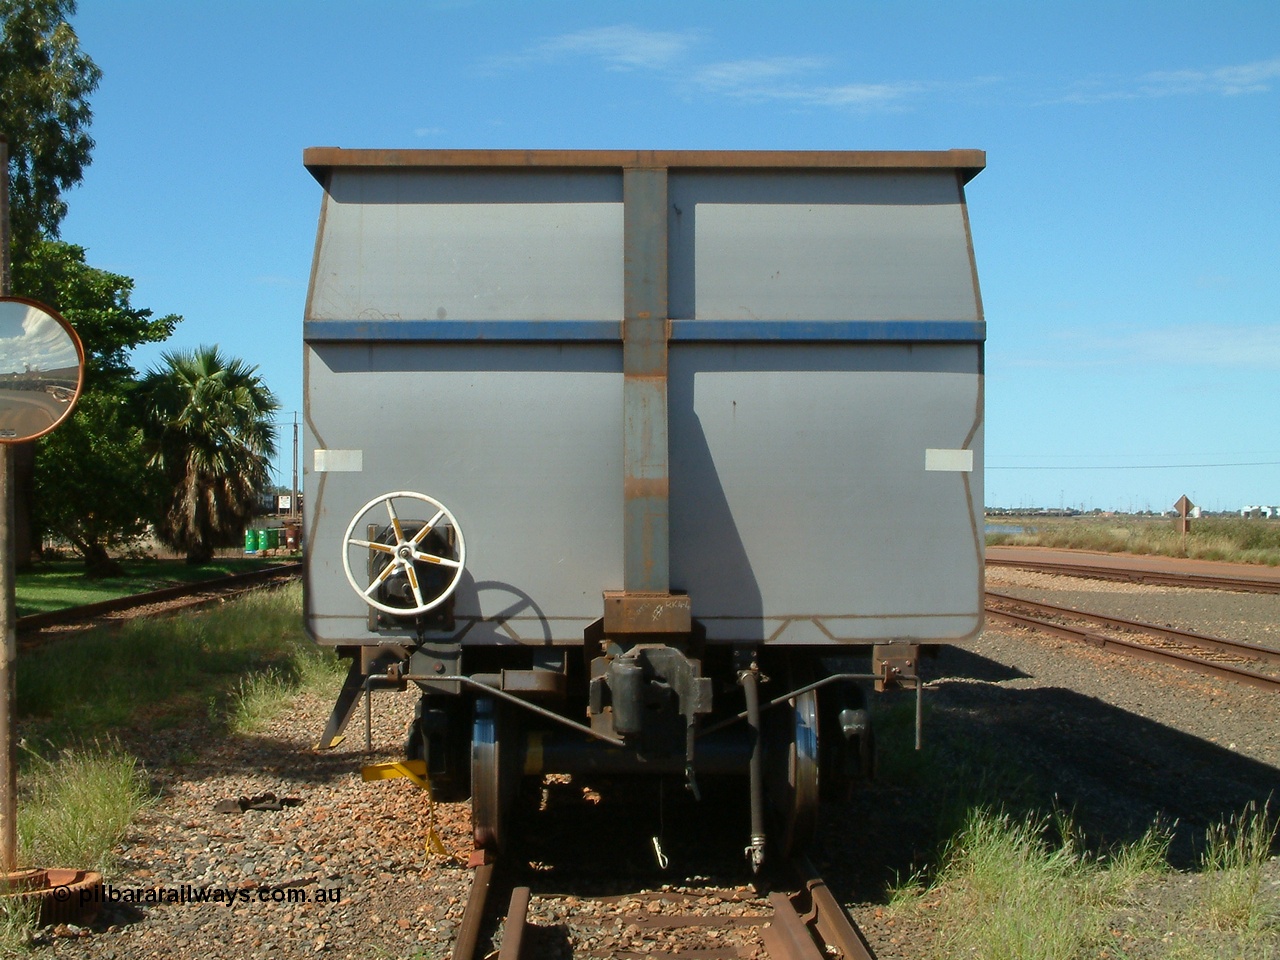 040412 144307
Nelson Point, Goninan built, Lynx Engineering designed ore waggon made from 5Cr12Ti stainless steel these waggons are known as Golynx waggons, view of handbrake end. 12th April 2004.
Keywords: Goninan-WA;Golynx;BHP-ore-waggon;